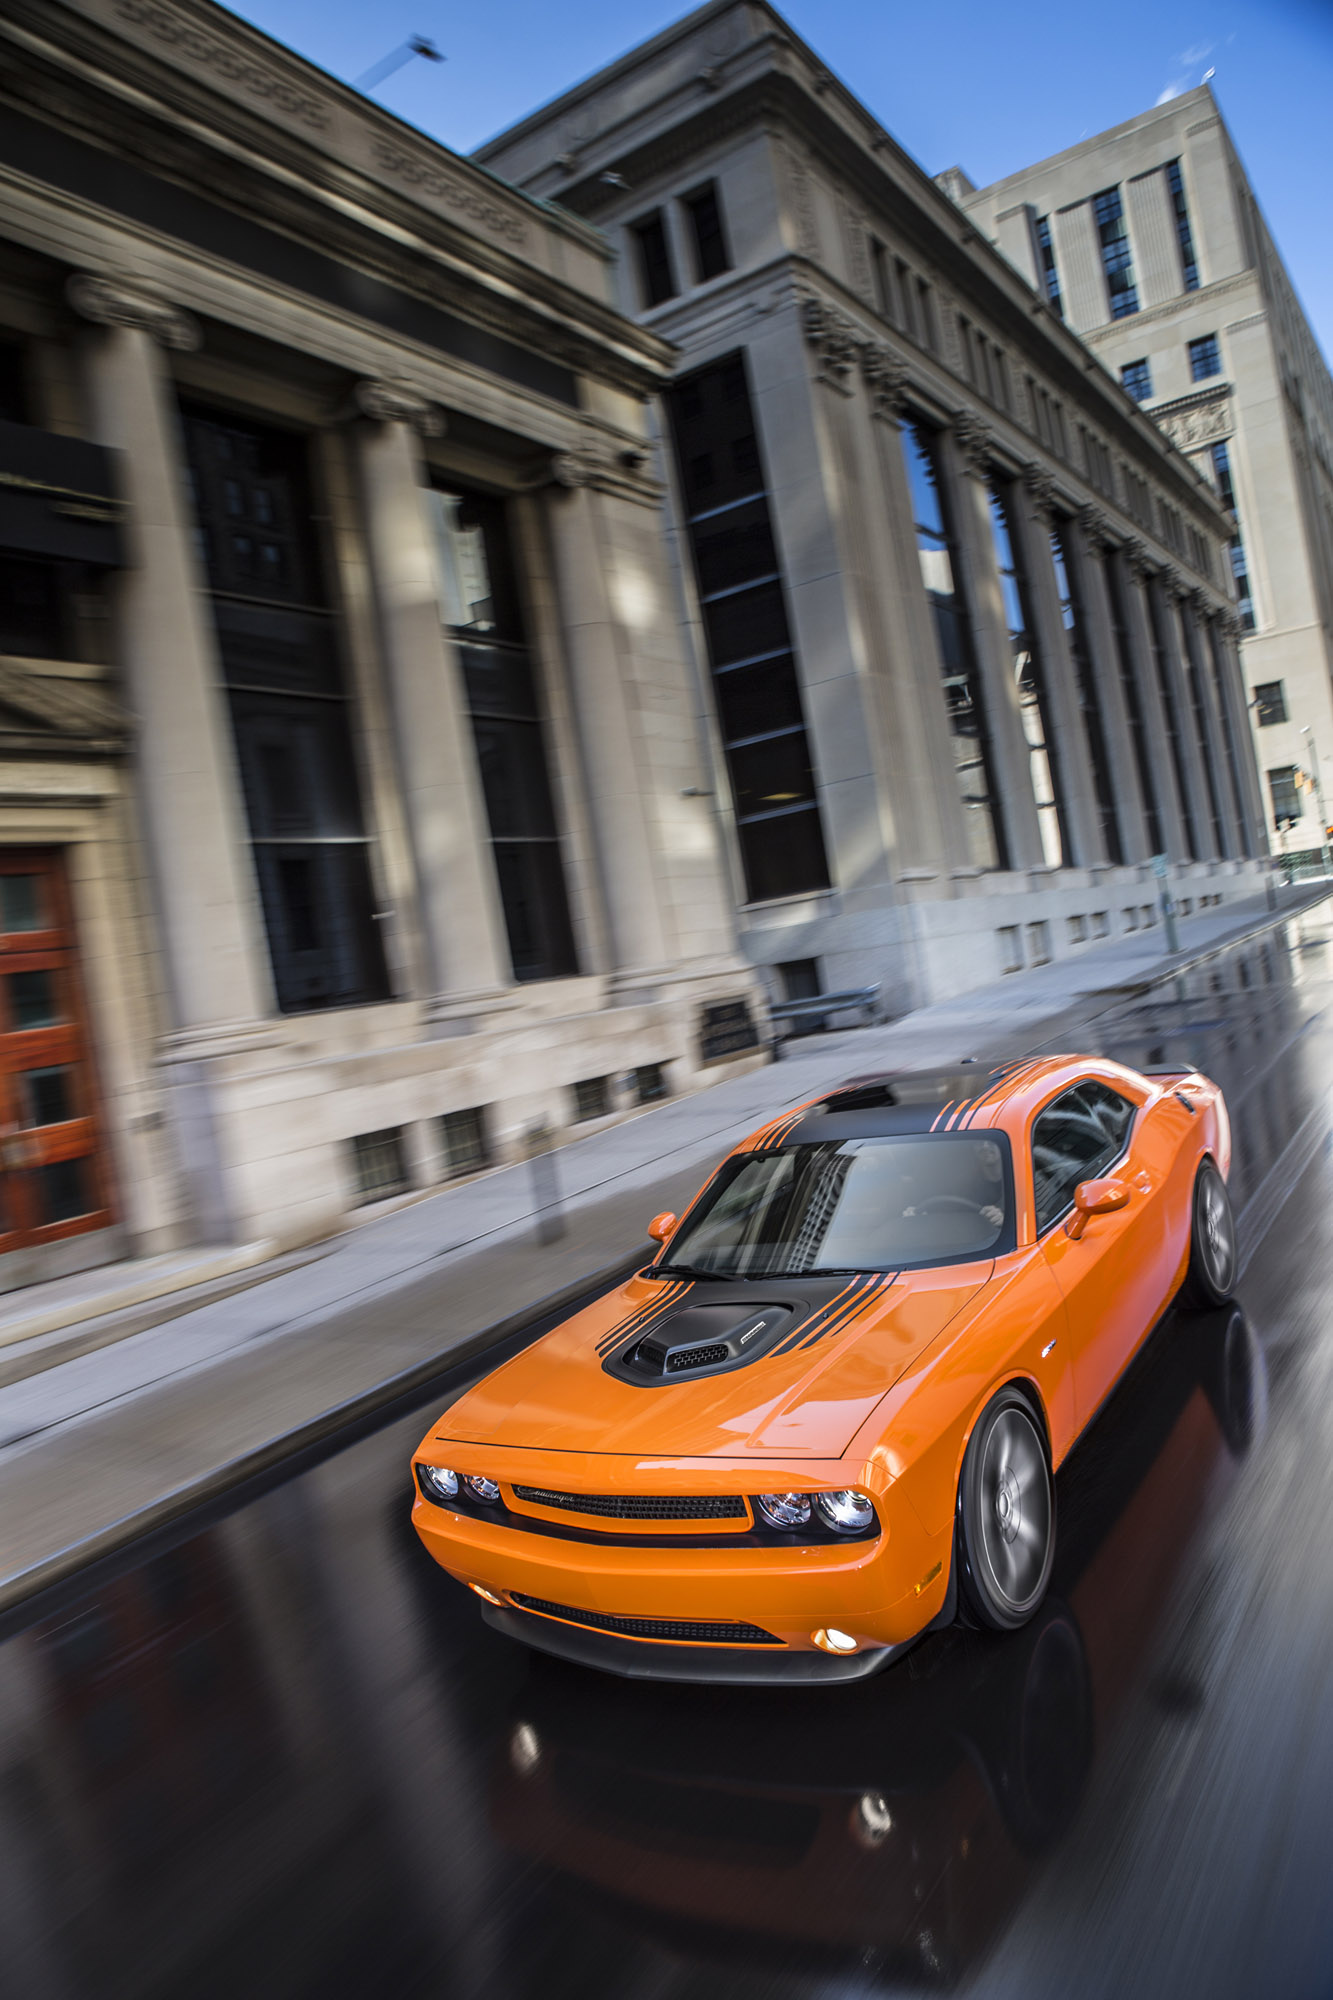 2014 Dodge Challenger RT Shaker - HD Pictures ...